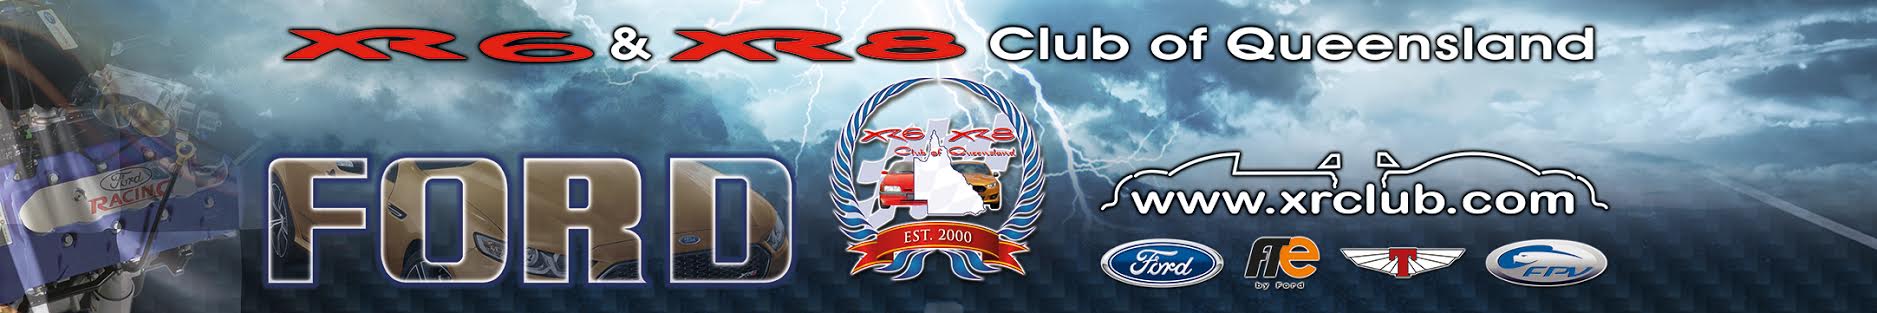 XR Club Windscreen Banner low res